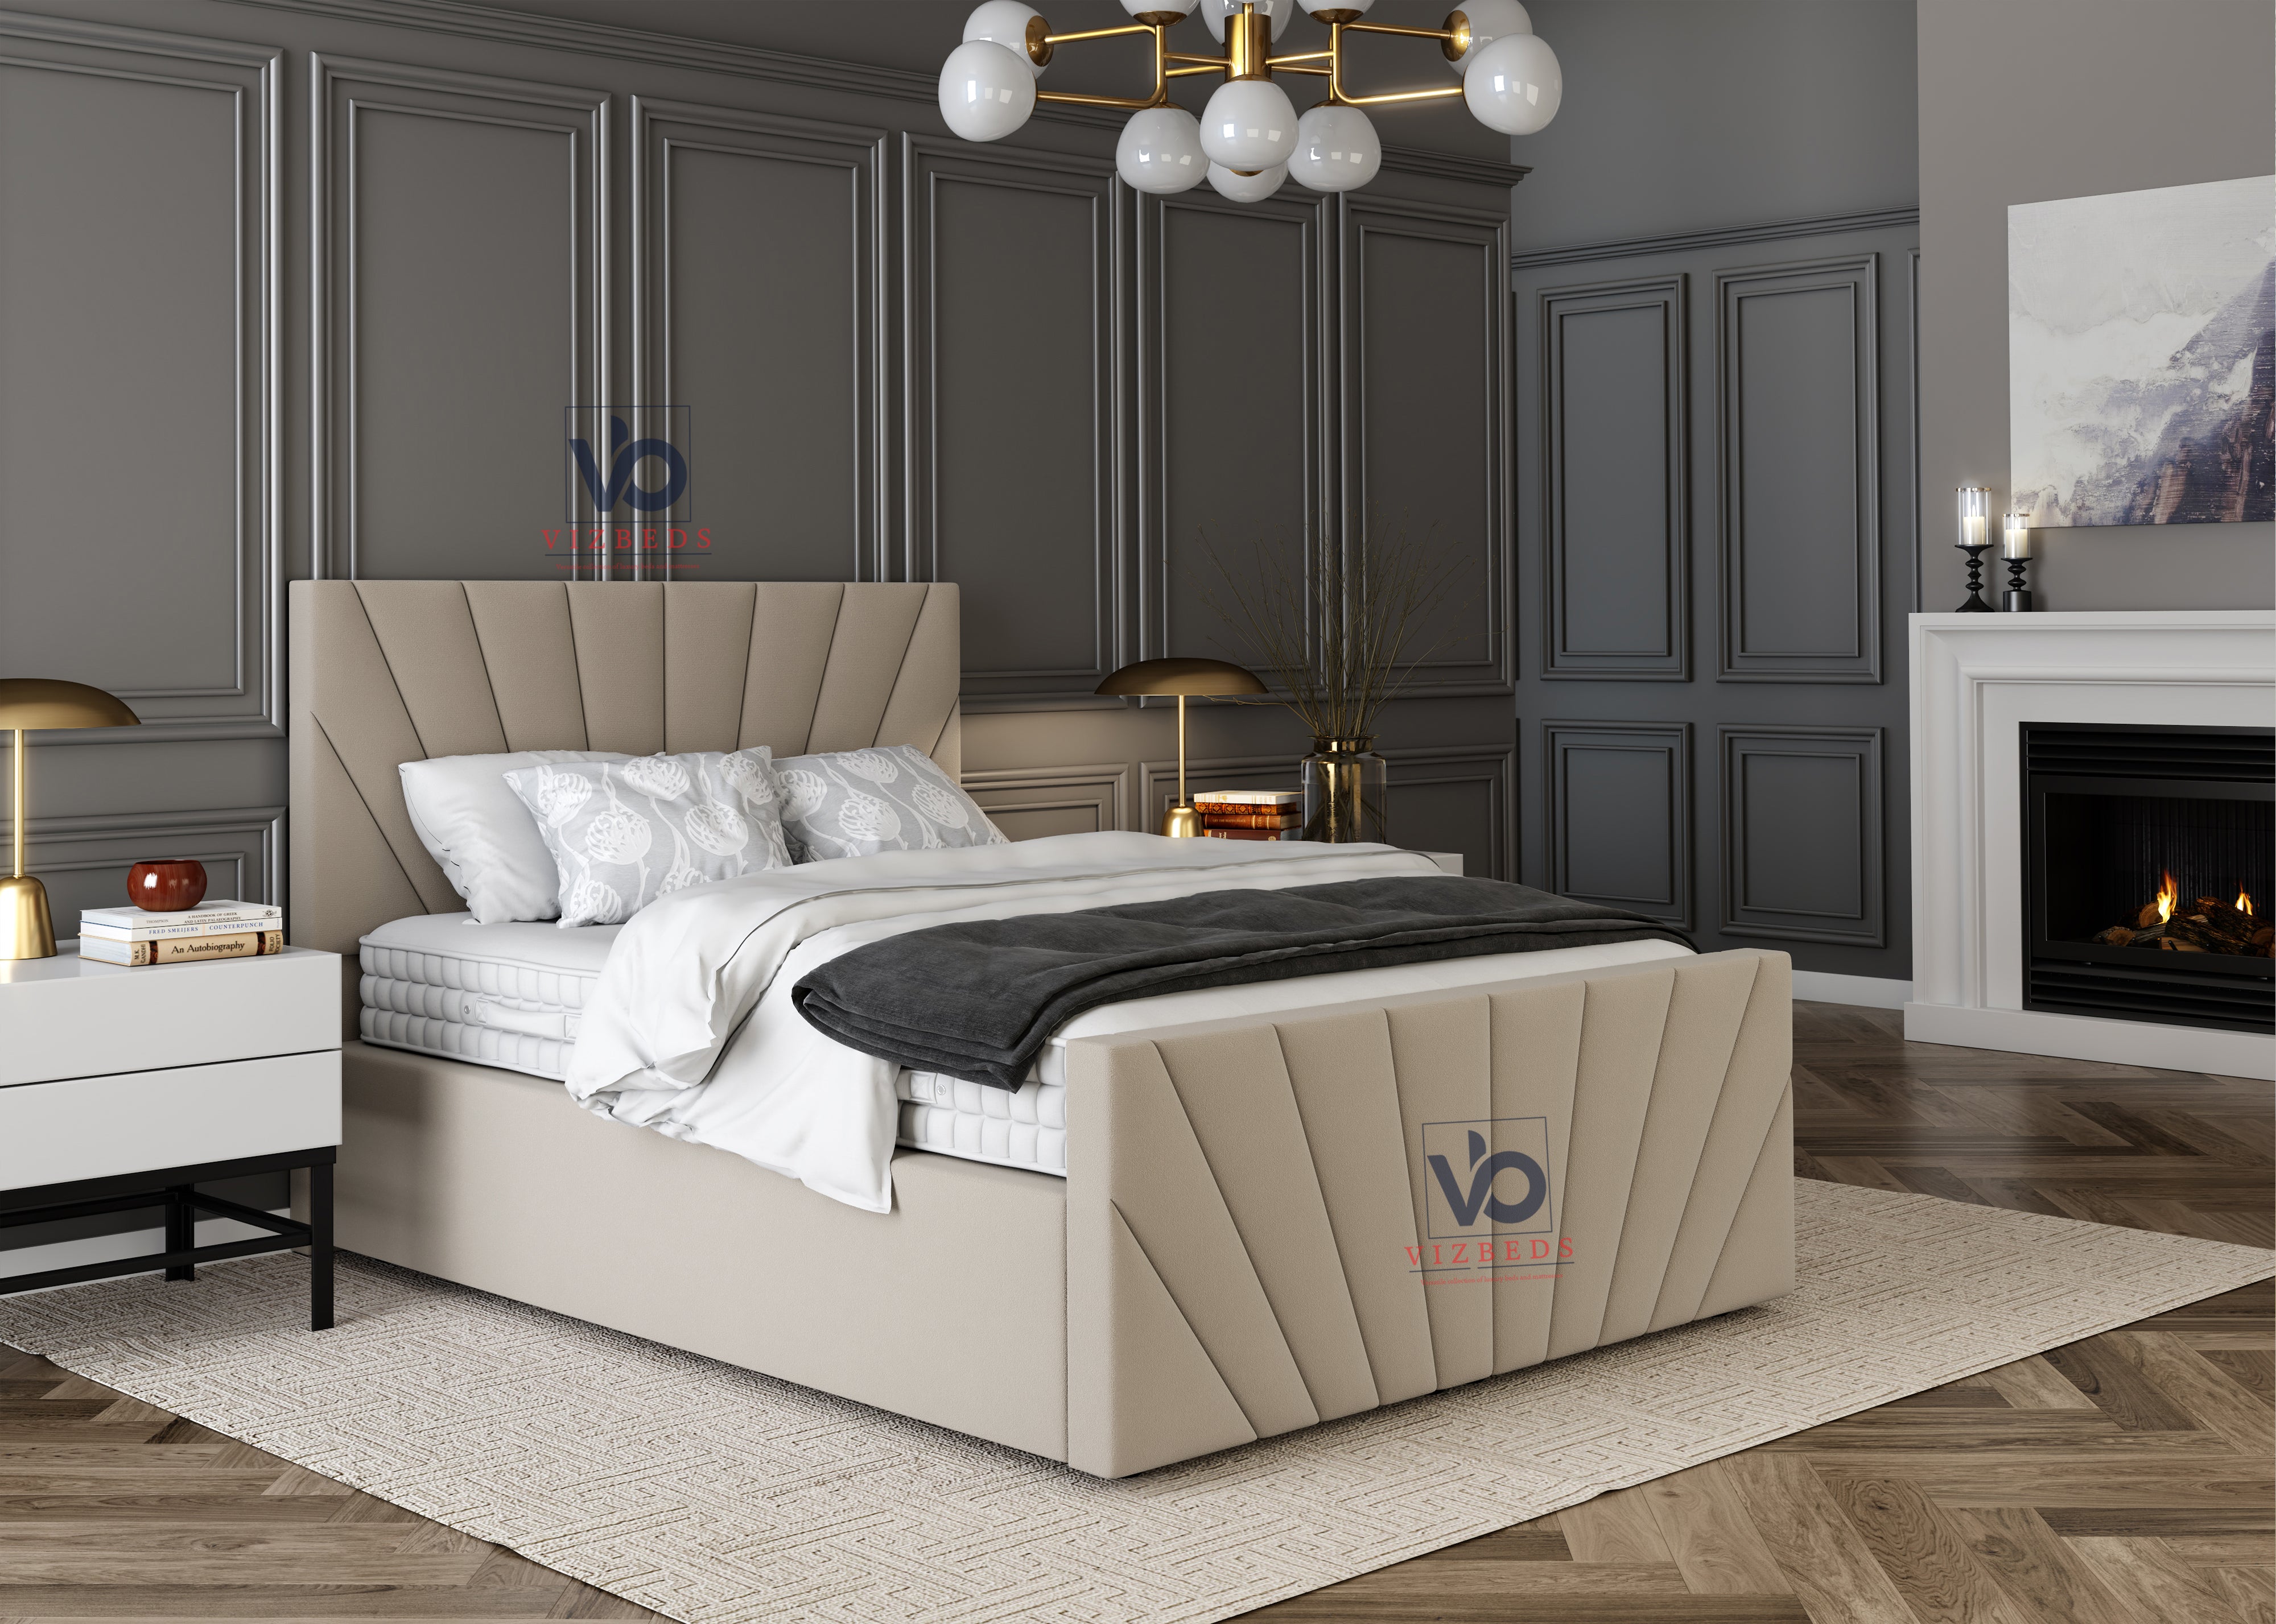 The Sunrise Bed With Luxury Headboard